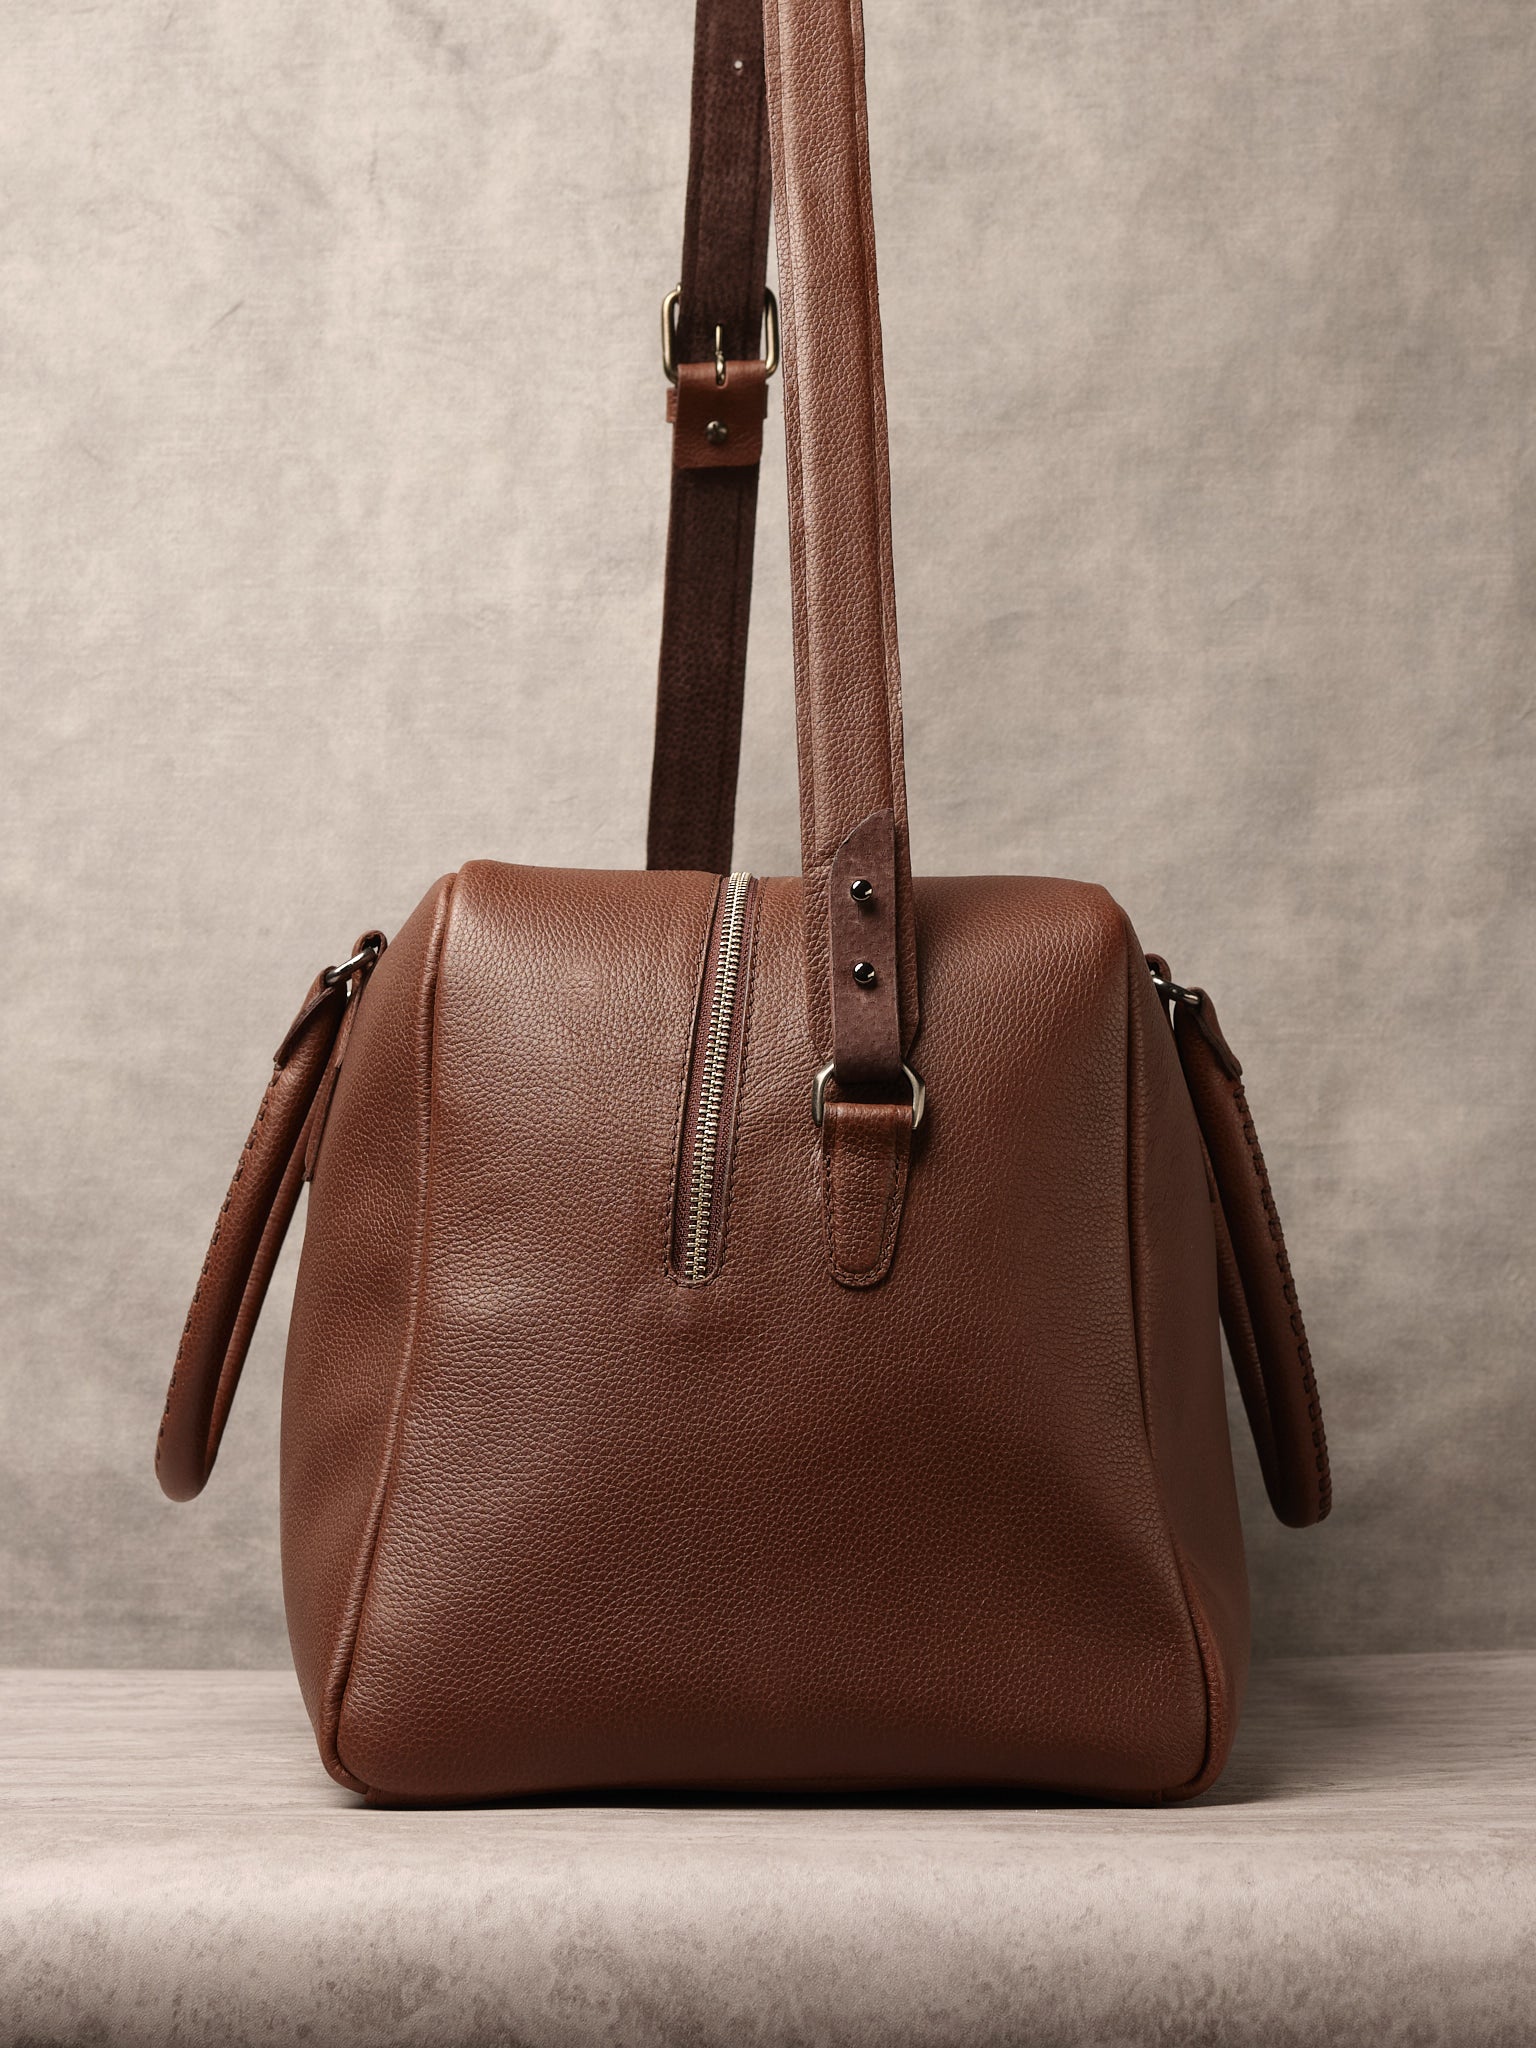 Adjustable Shoulder Strap. Duffle Bag Carry On Brown by Capra Leather